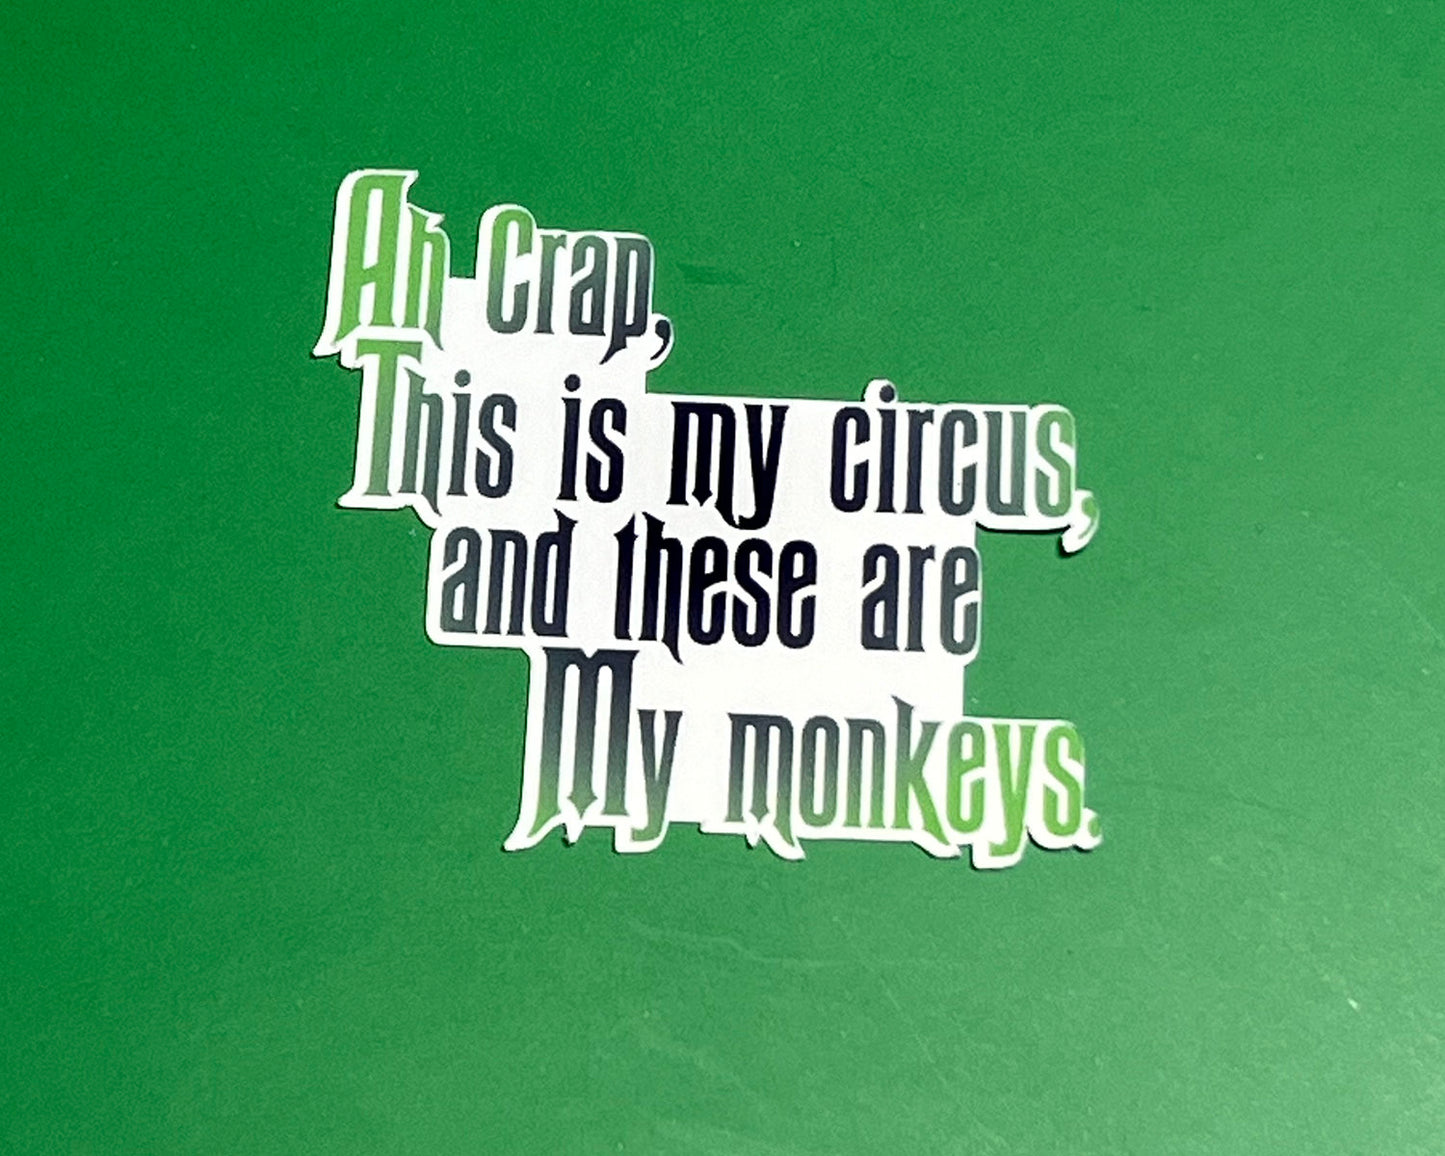 Ah Crap, This is my Circus and these are my monkeys. - Waterproof Sticker